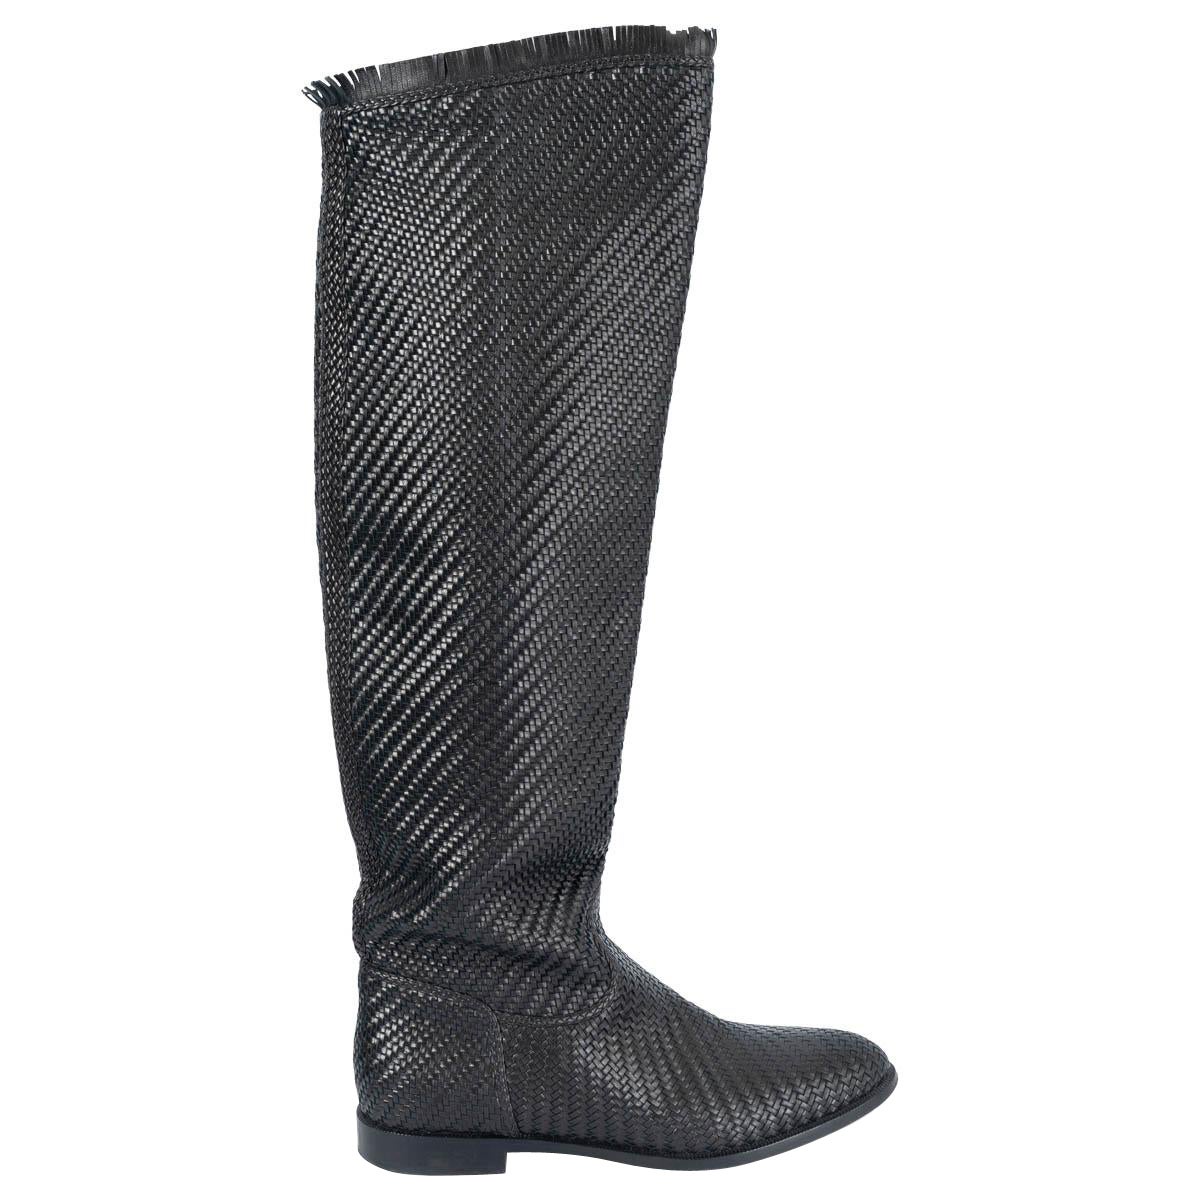 CHRISTIAN DIOR black woven leather 2020 GLOBAL RIDING Boots Shoes 38.5 For Sale